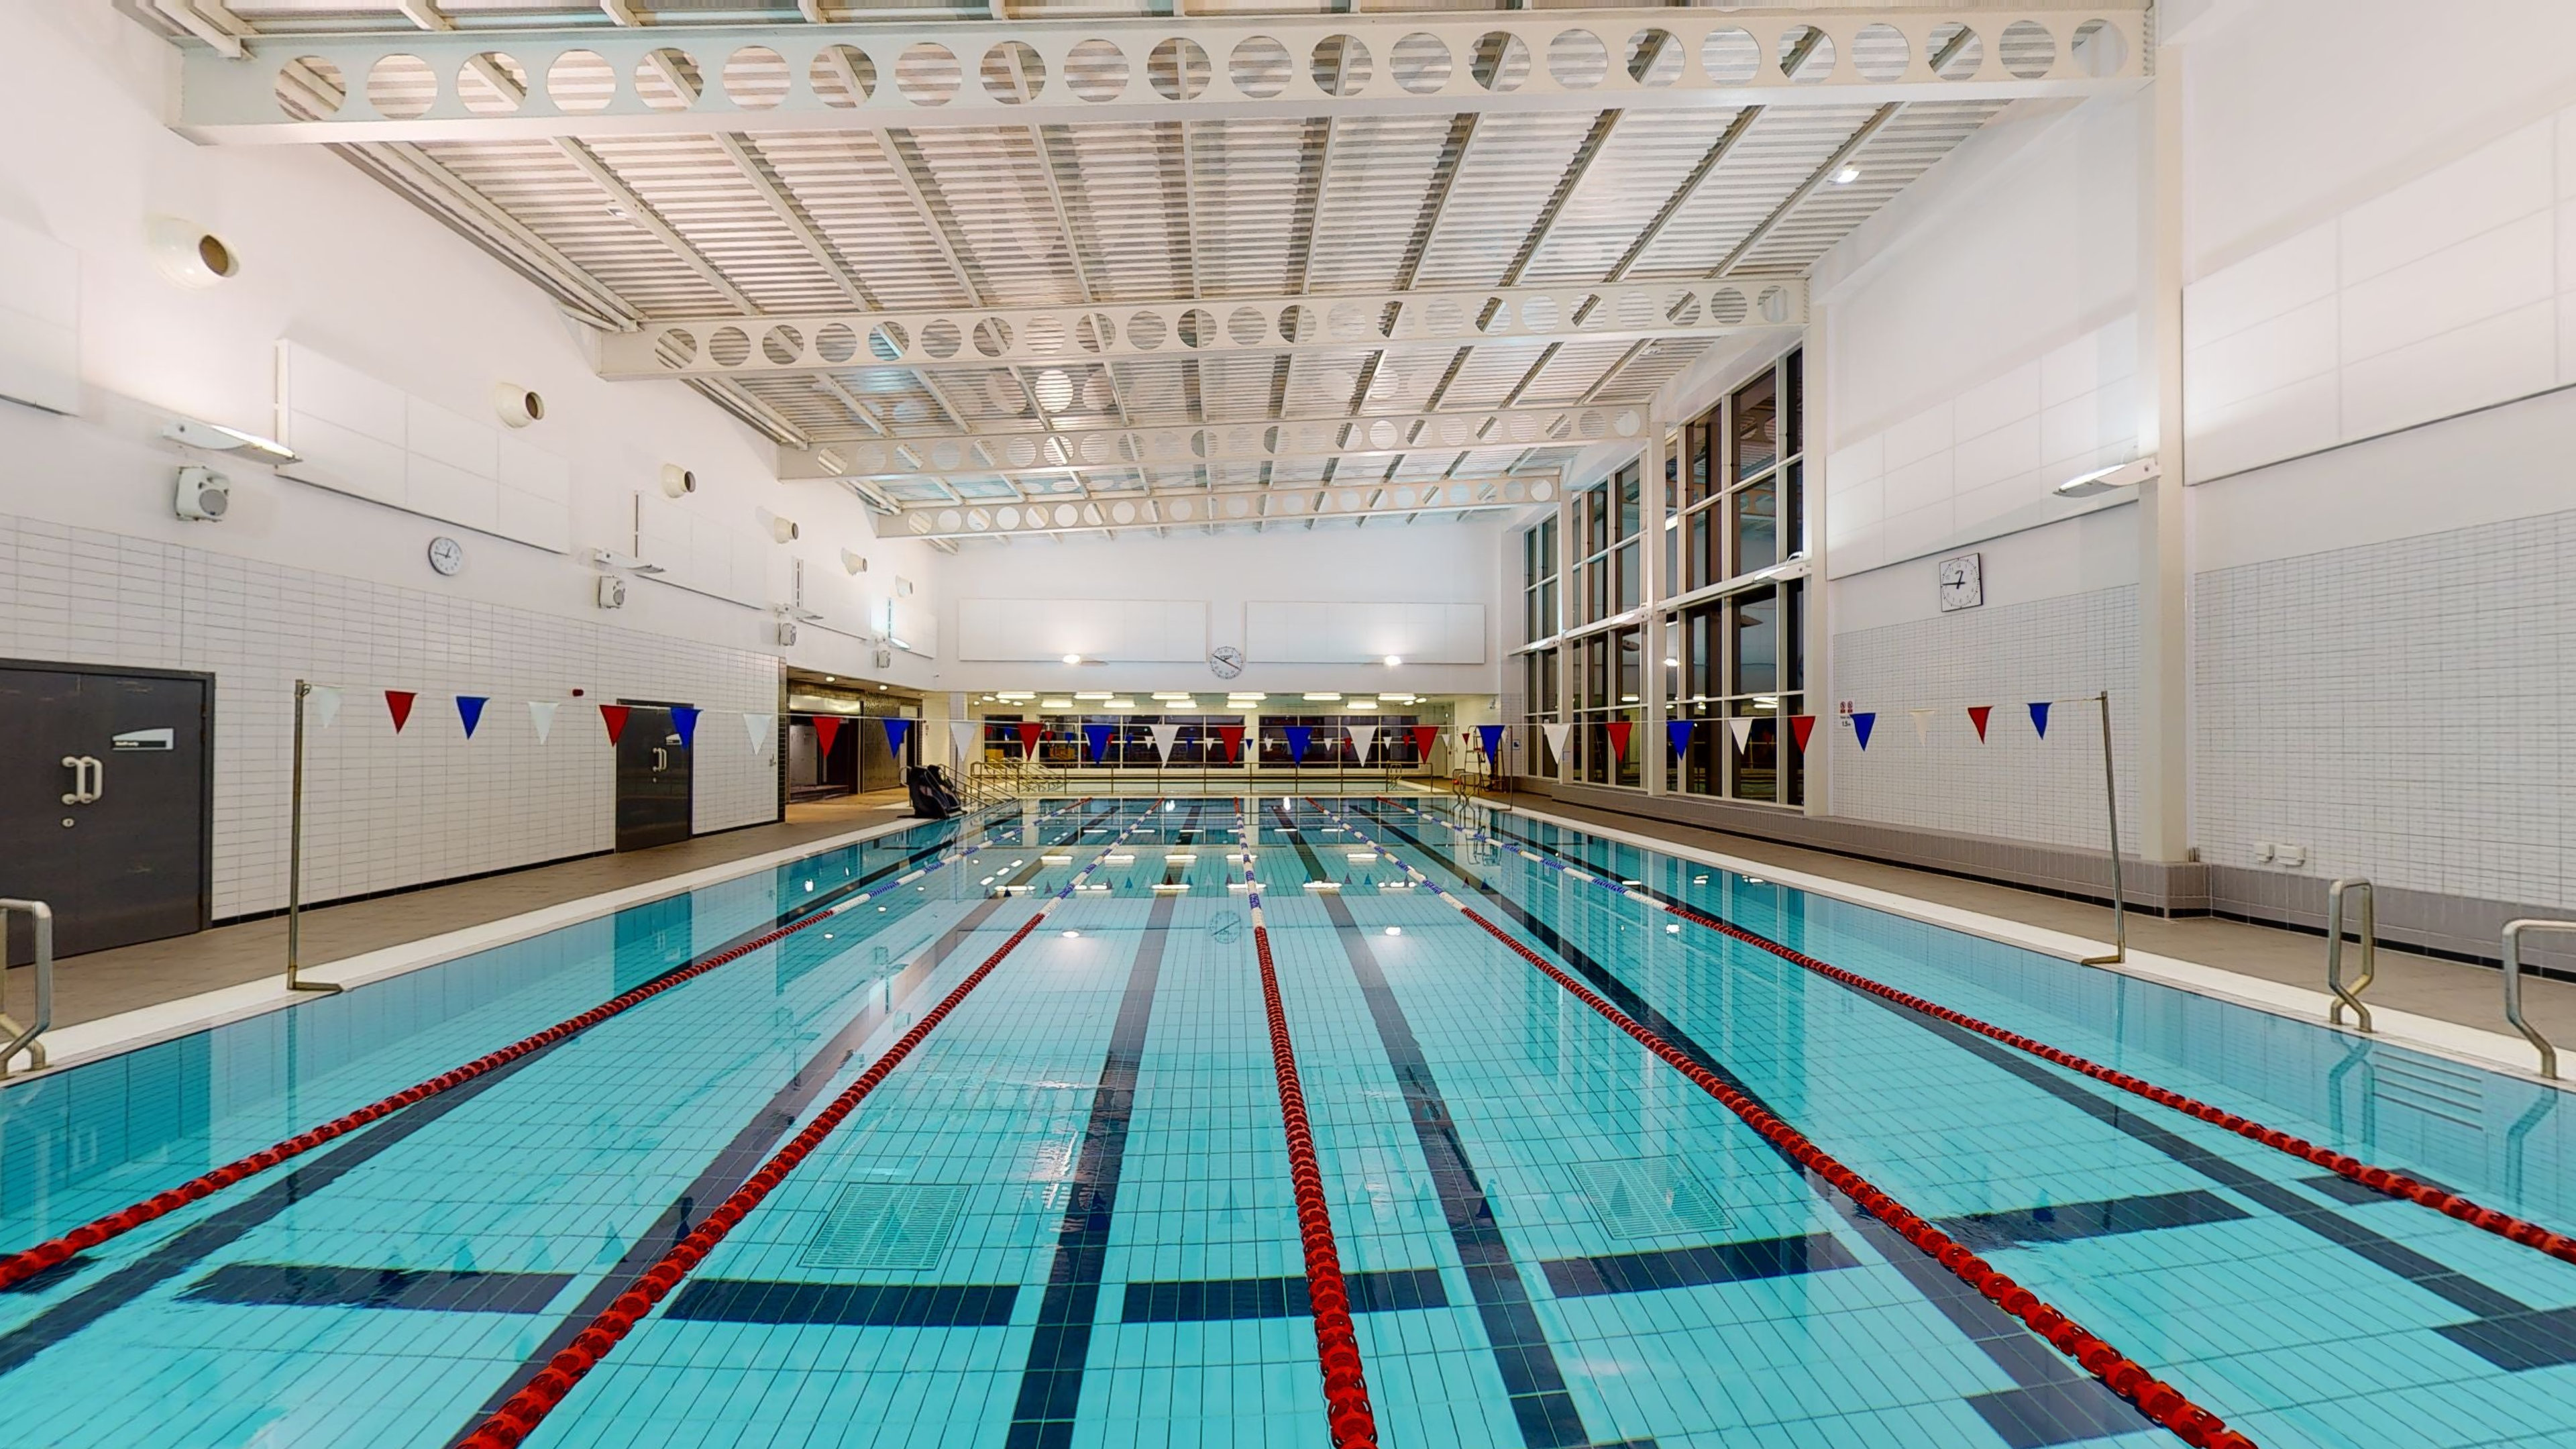 Swimming pool at Graves Health and Sports Centre Graves Health and Sports Centre Sheffield 01142 839900